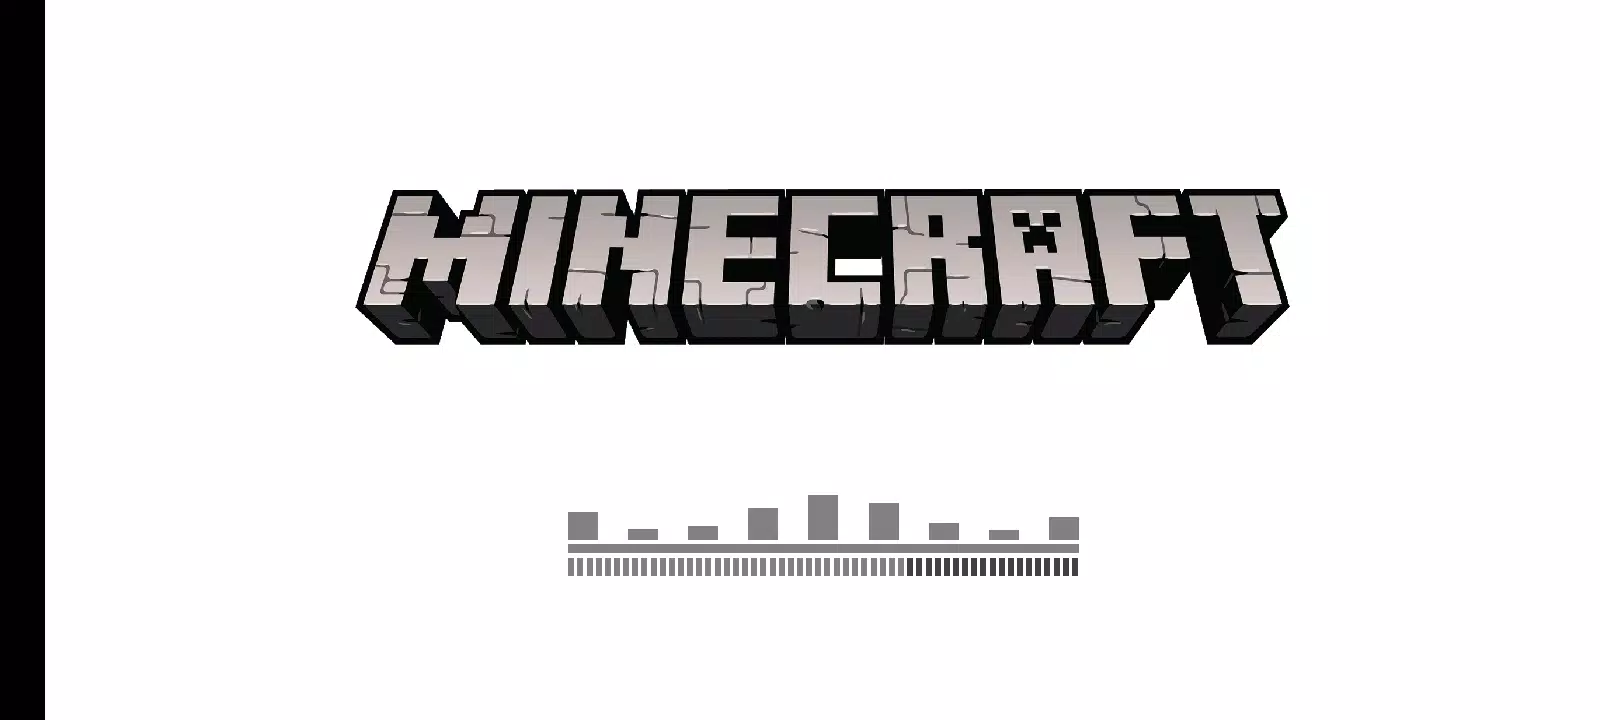 Minecraft Original APK for Android Download